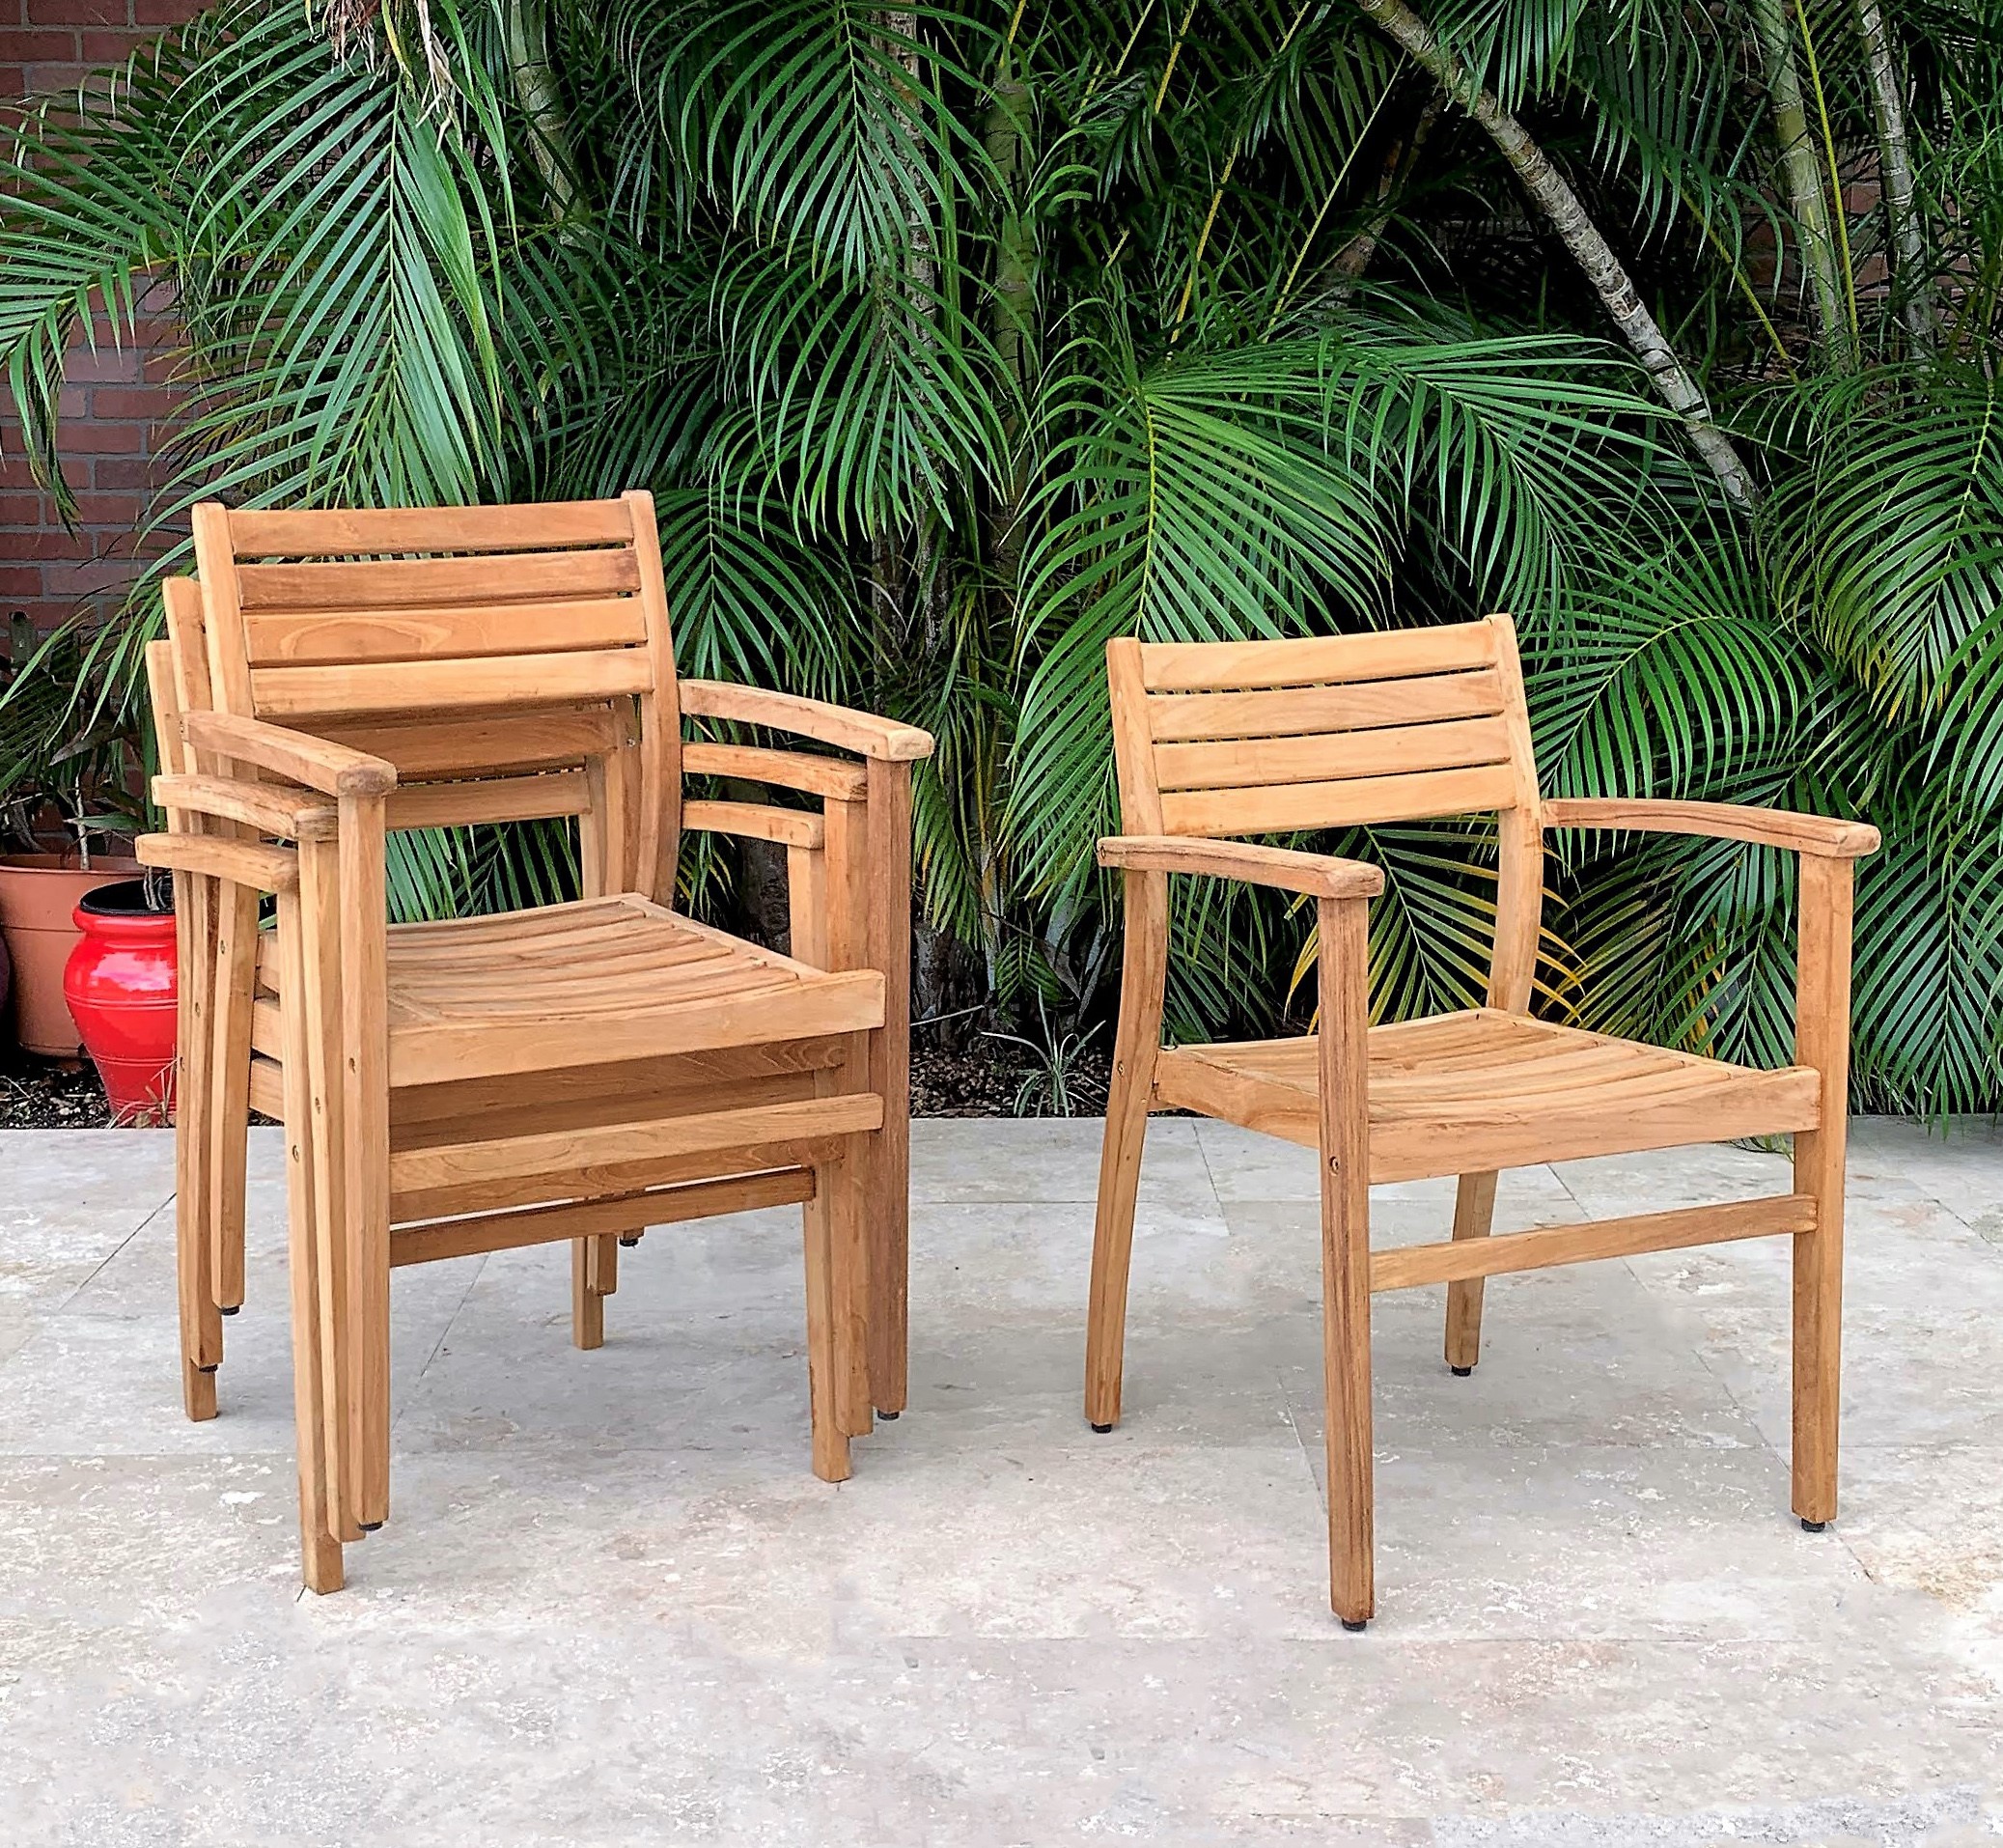 Clanfield Teak Wood 5-Piece Patio Dining Set with Stacking Armchairs - image 2 of 3